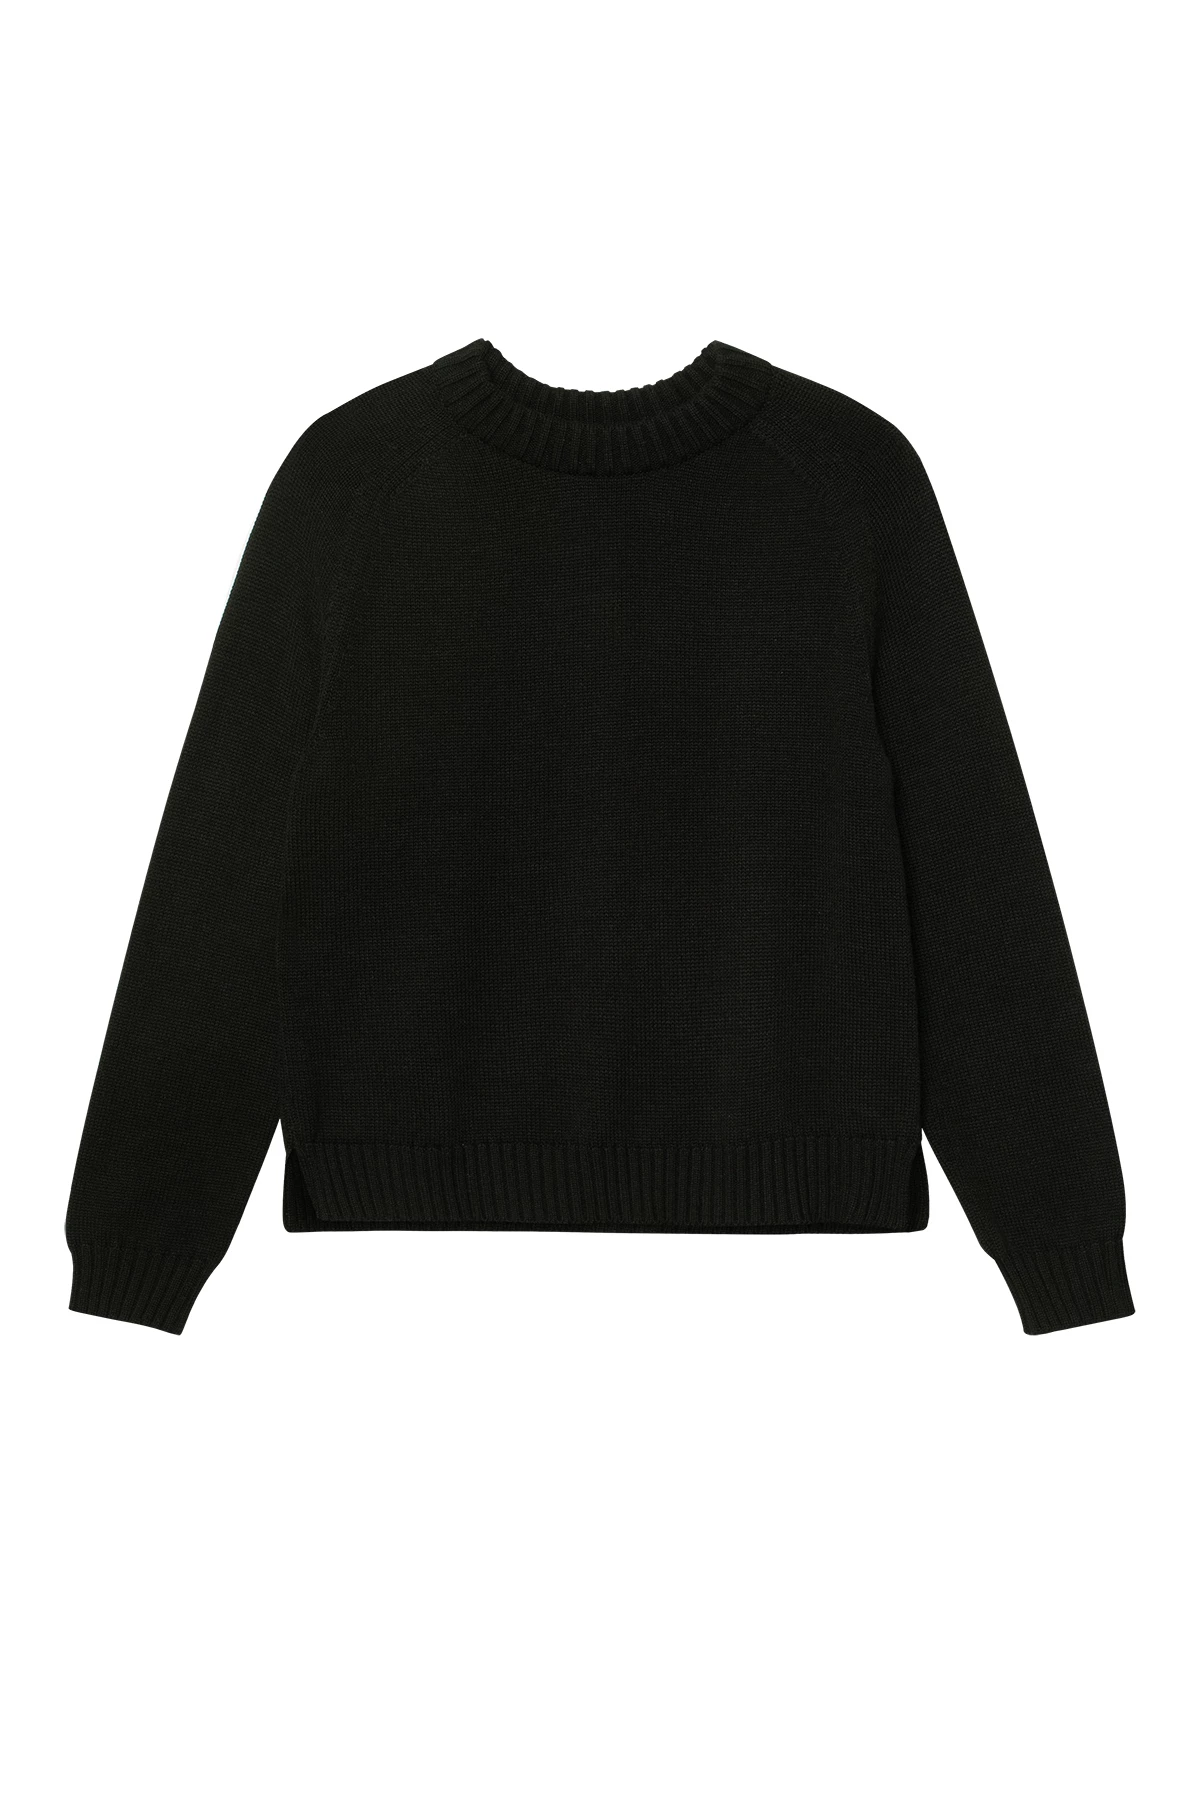 Black basic knitted sweater with cotton, photo 6